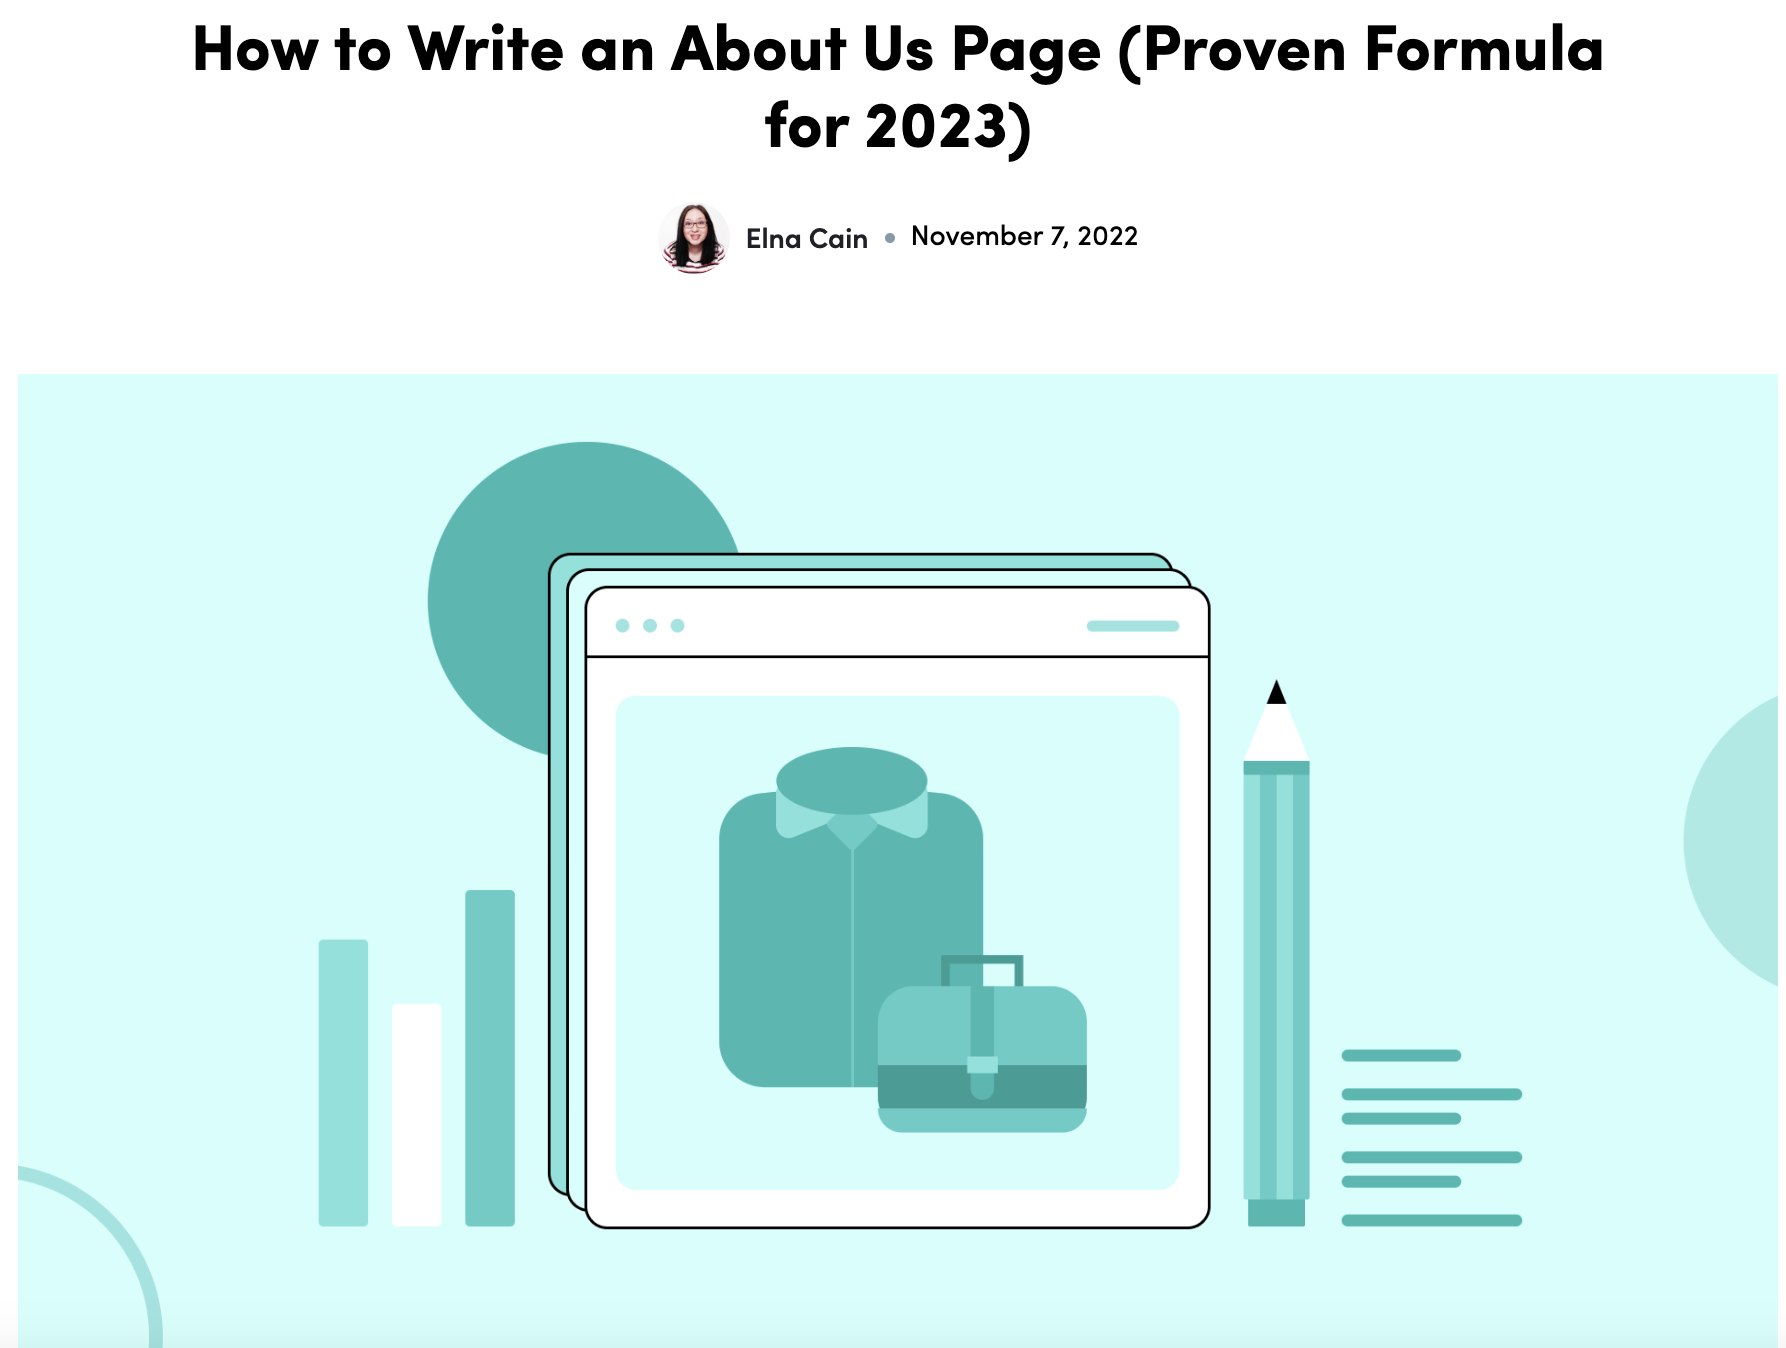 How to Write an About Us Page (Proven Formula)